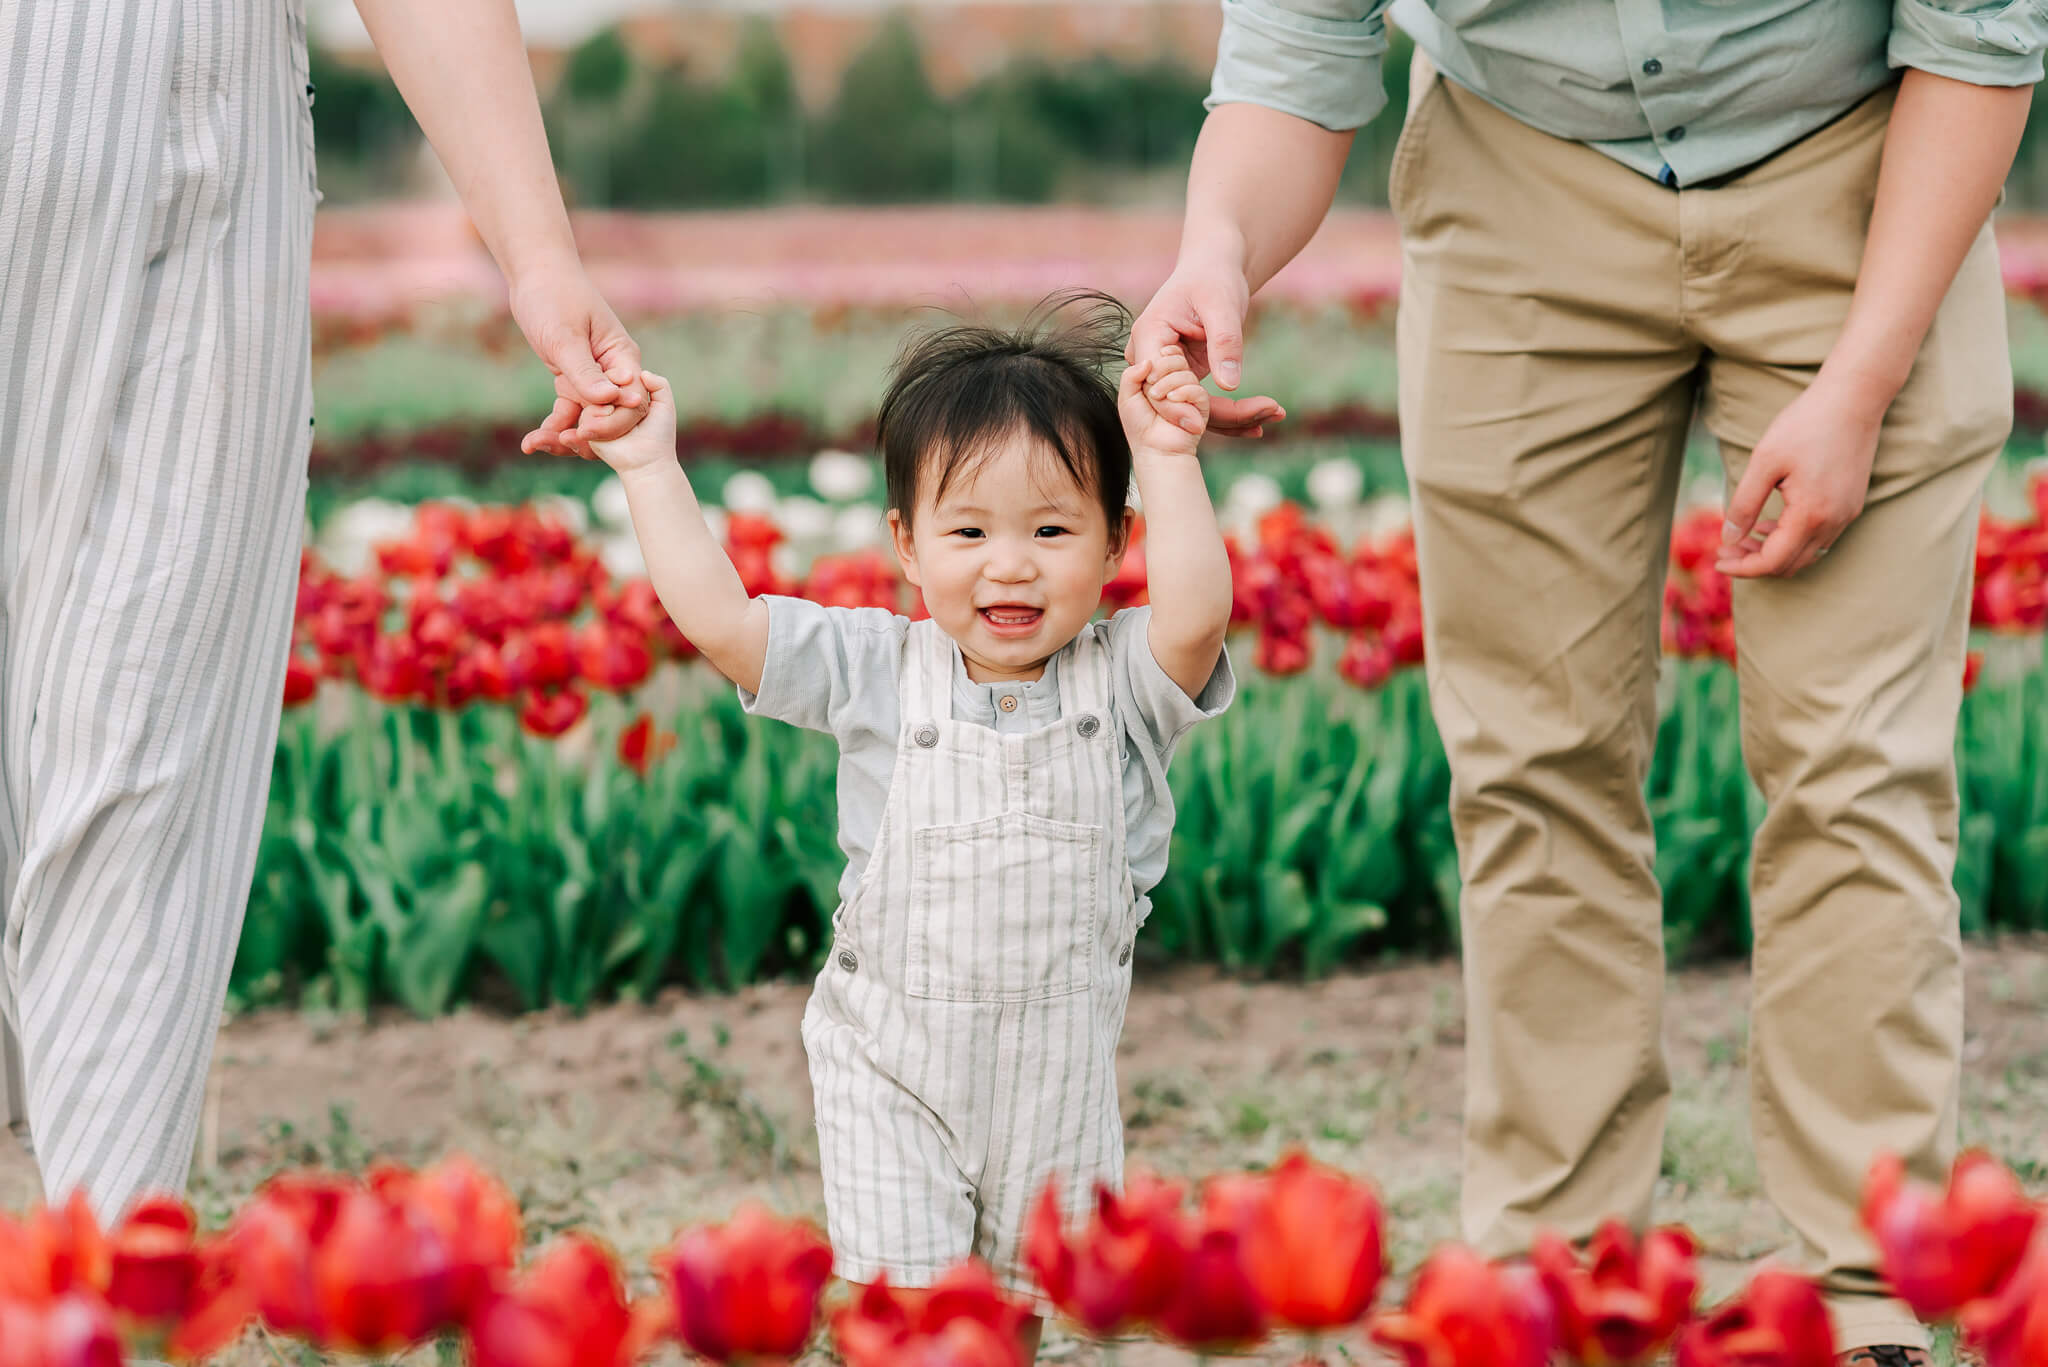 A mother and father walk their toddler son by holding his hands through a red tulip garden things to do in fairfax